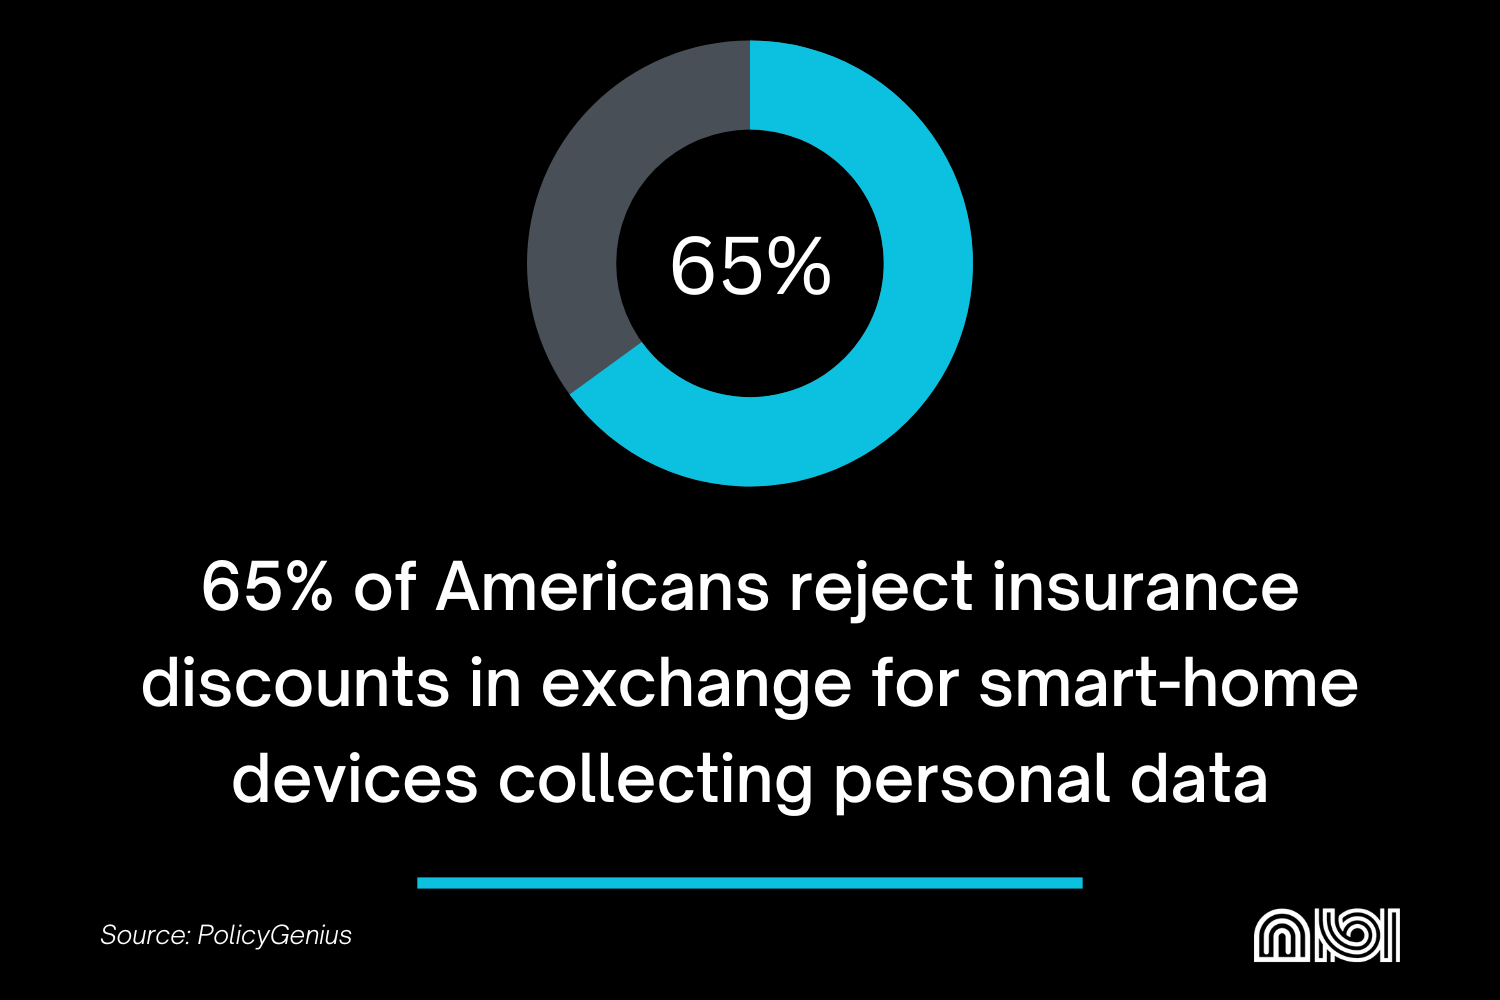 65% of U.S. citizens against sharing personal data from smart devices for insurance discounts